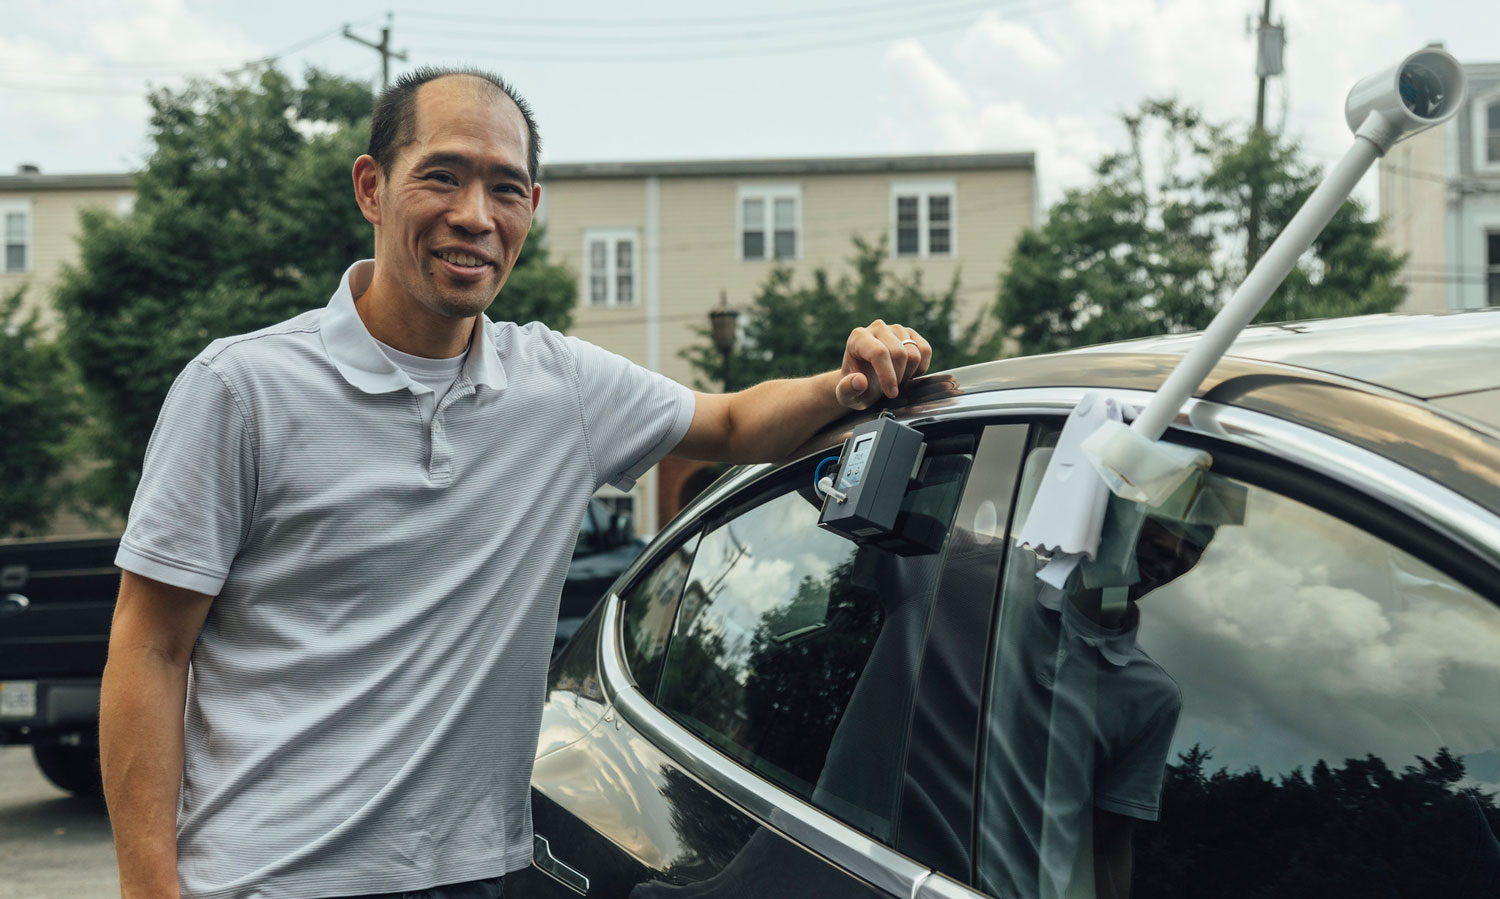 VCU College of Engineering chemical and life science engineering professor Stephen S. Fong, Ph.D, affixes a monitor to measure local ozone pollution on his car.